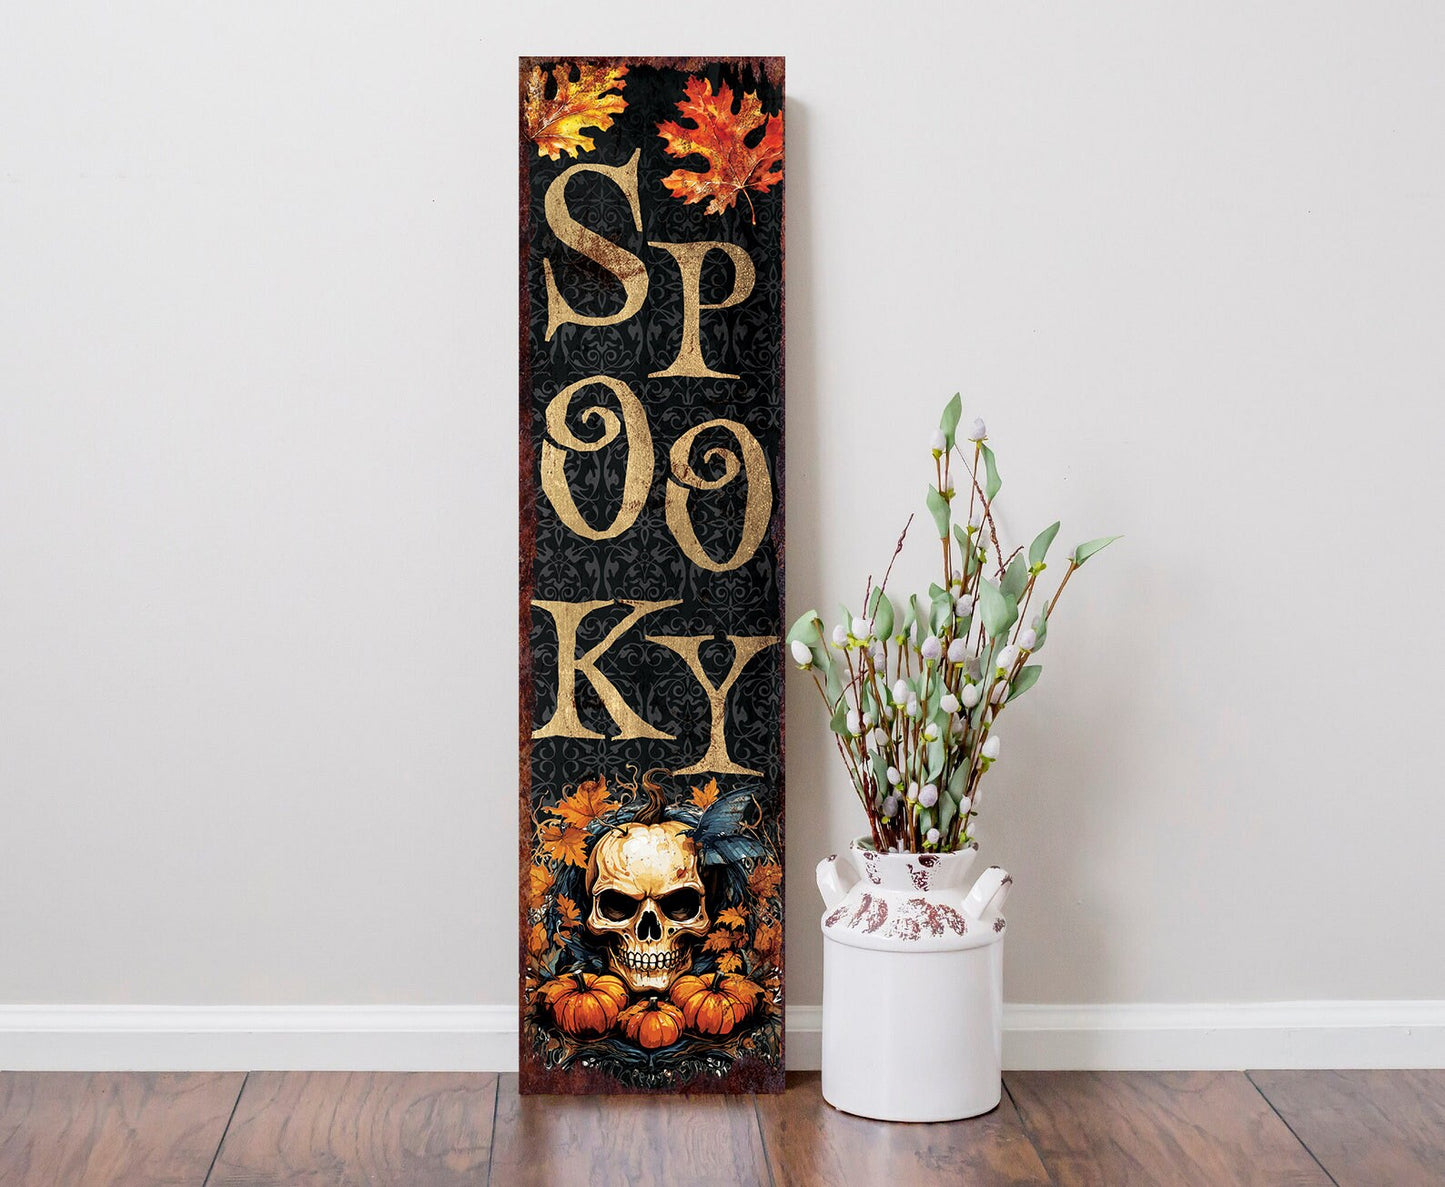 36in "Spooky" Halloween Porch Sign - Front Porch Halloween Welcome Sign, Vintage Halloween Decoration, Rustic Modern Farmhouse Entryway Board